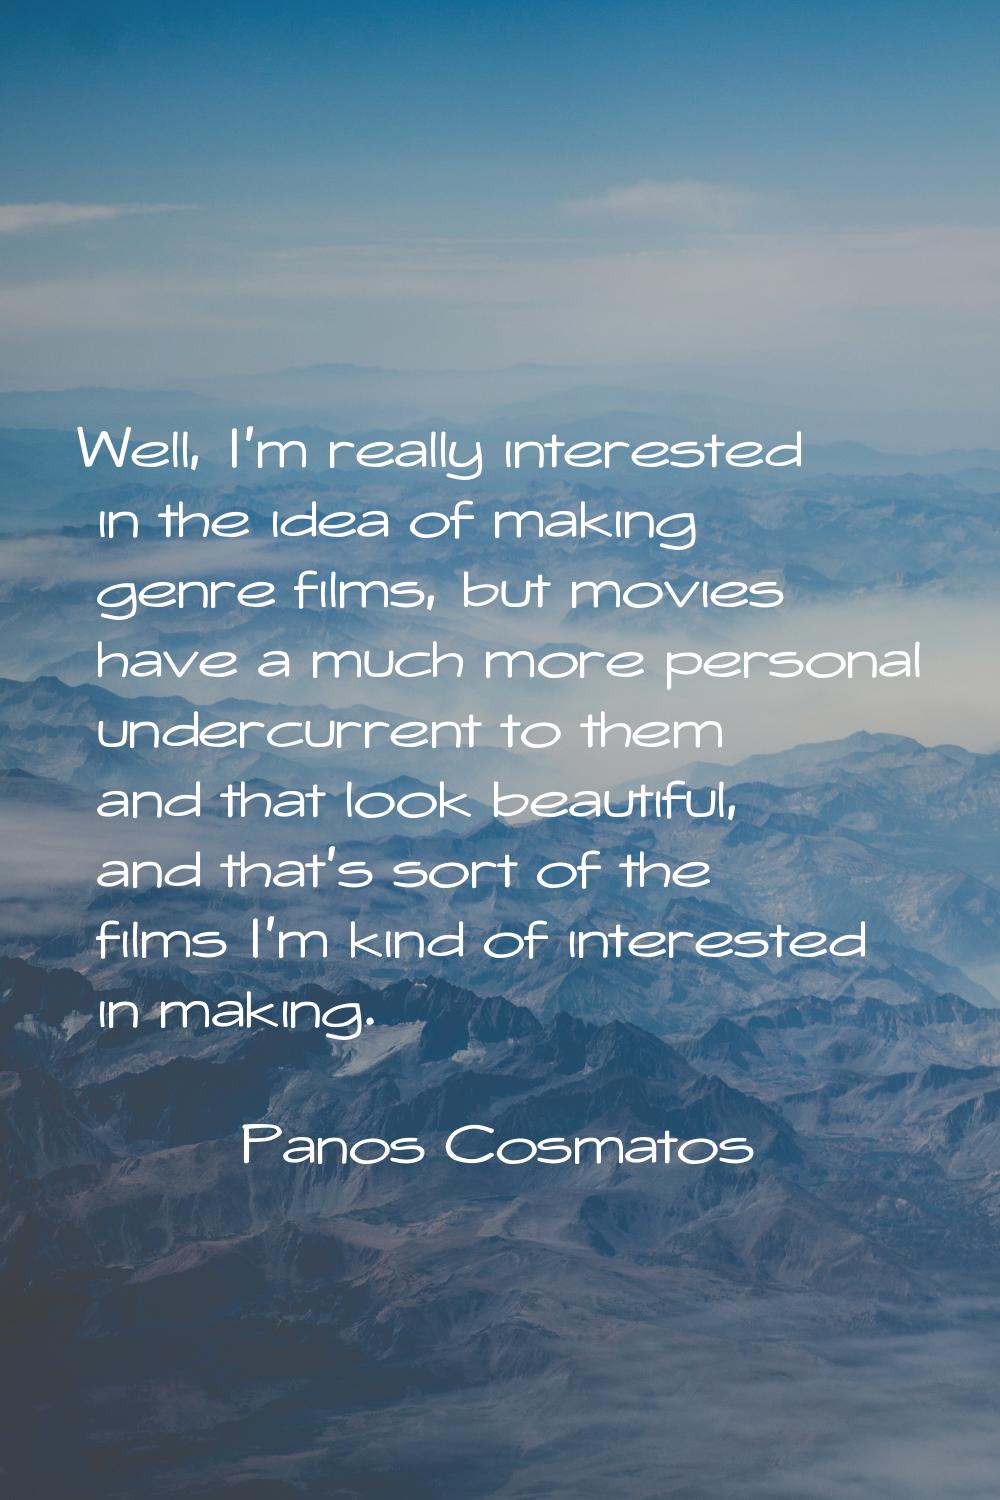 Well, I'm really interested in the idea of making genre films, but movies have a much more personal